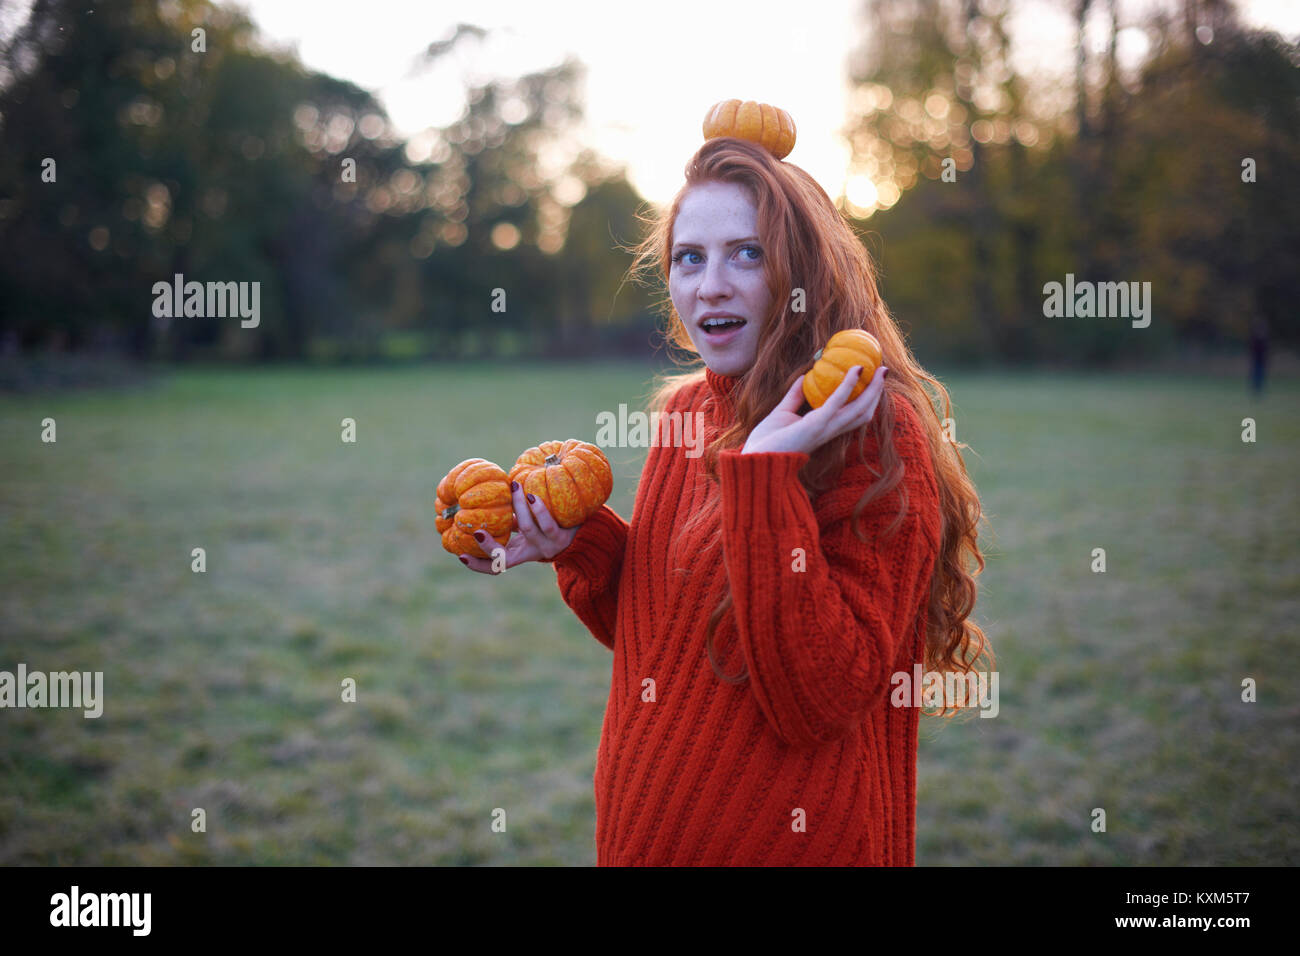 Young woman in rural setting,holding pumpkins,pumpkin balanced in head Stock Photo